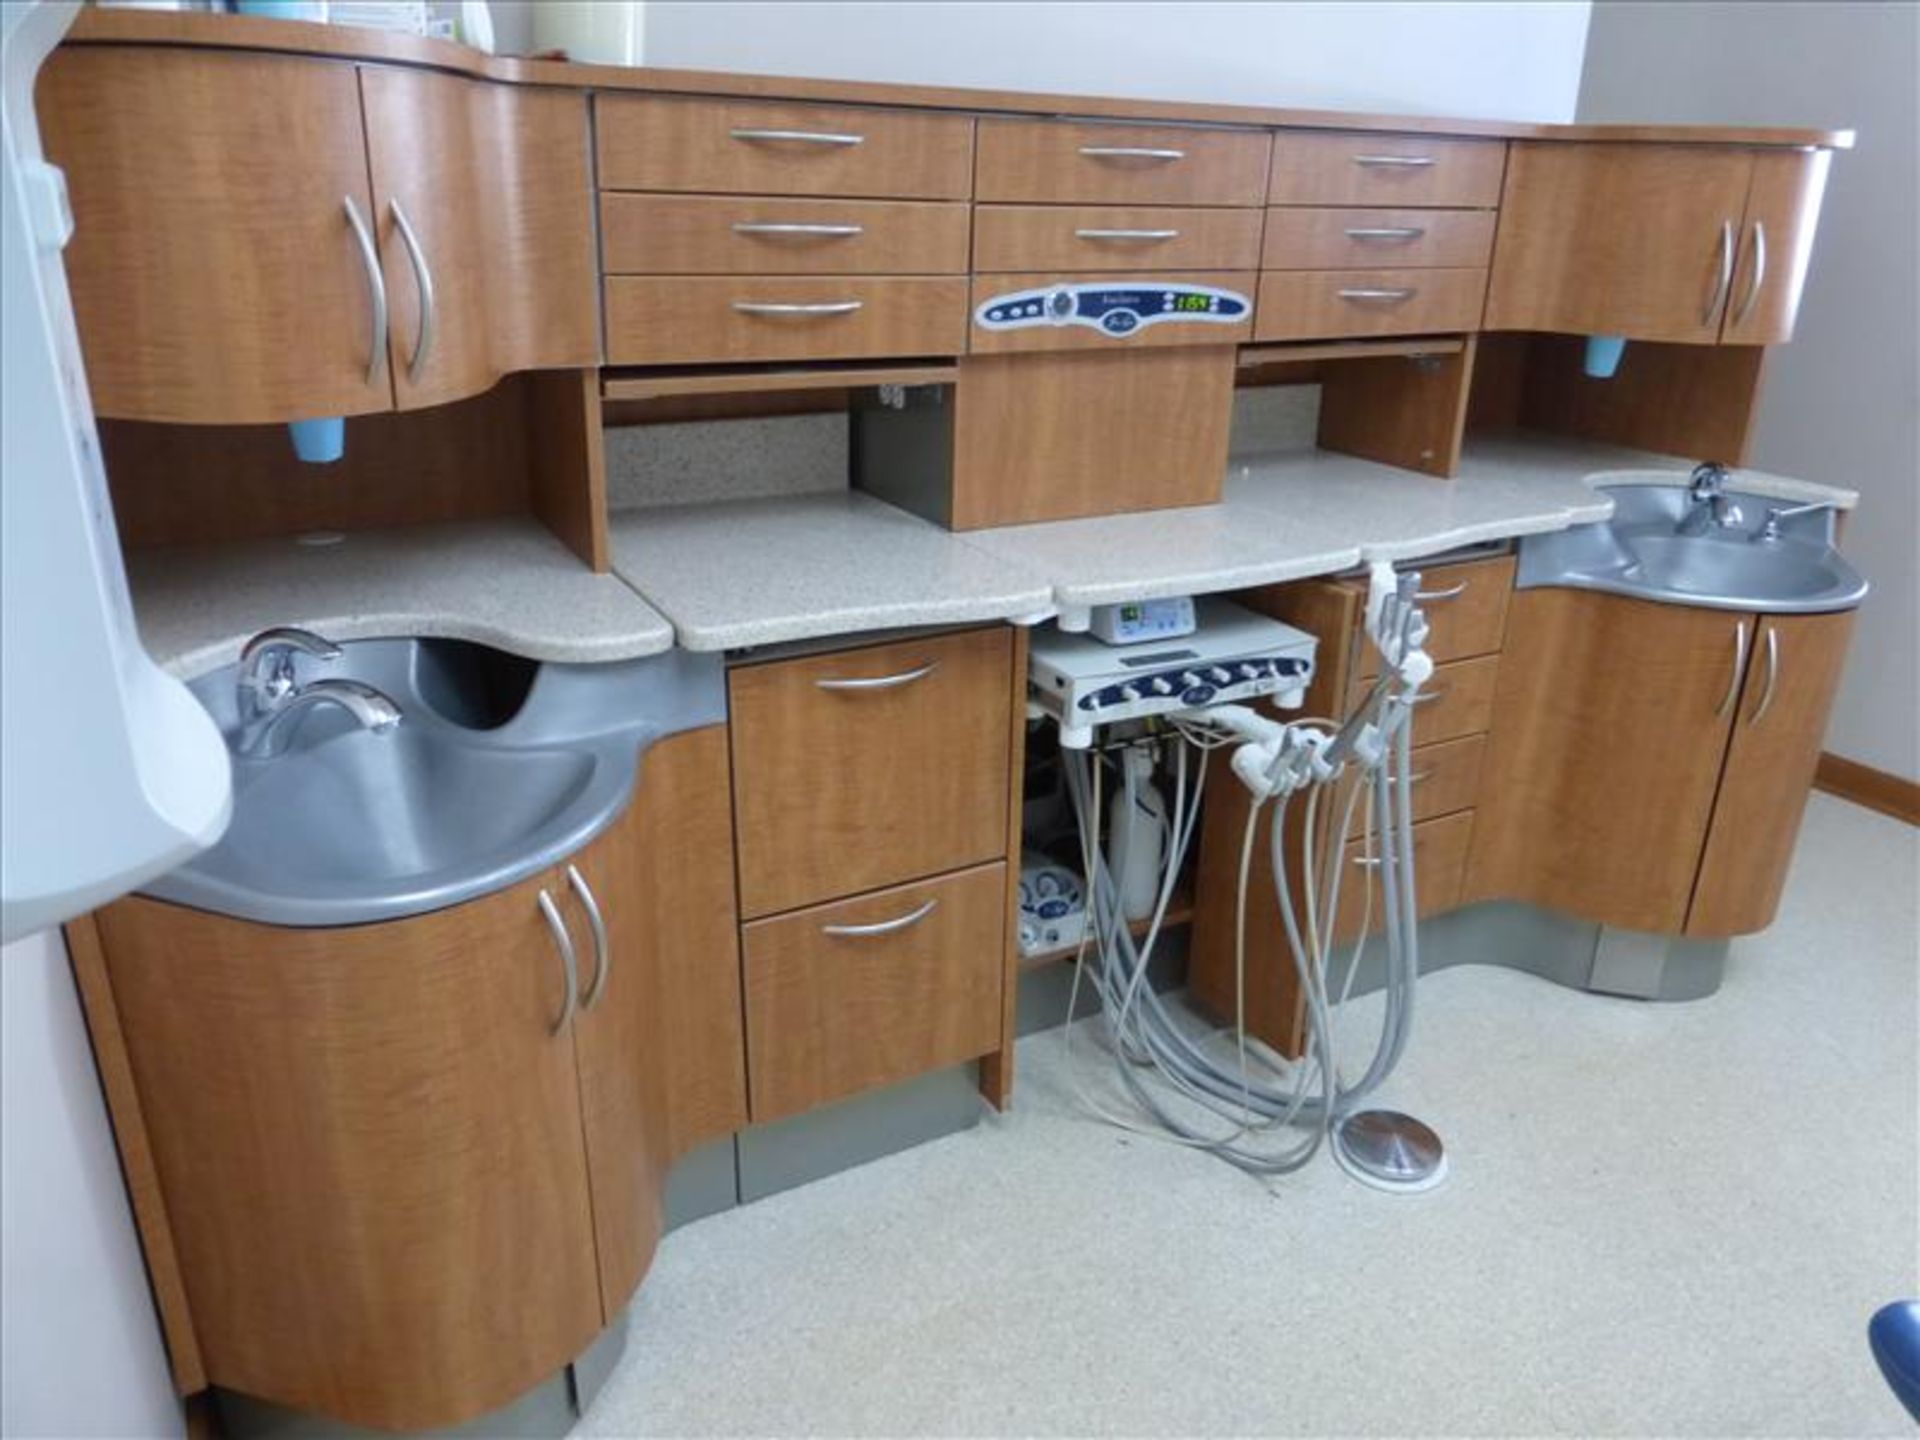 Pelton & Crane chair, model SP30 w/ delivery system, dental light, "The Executive" central console - Image 15 of 17